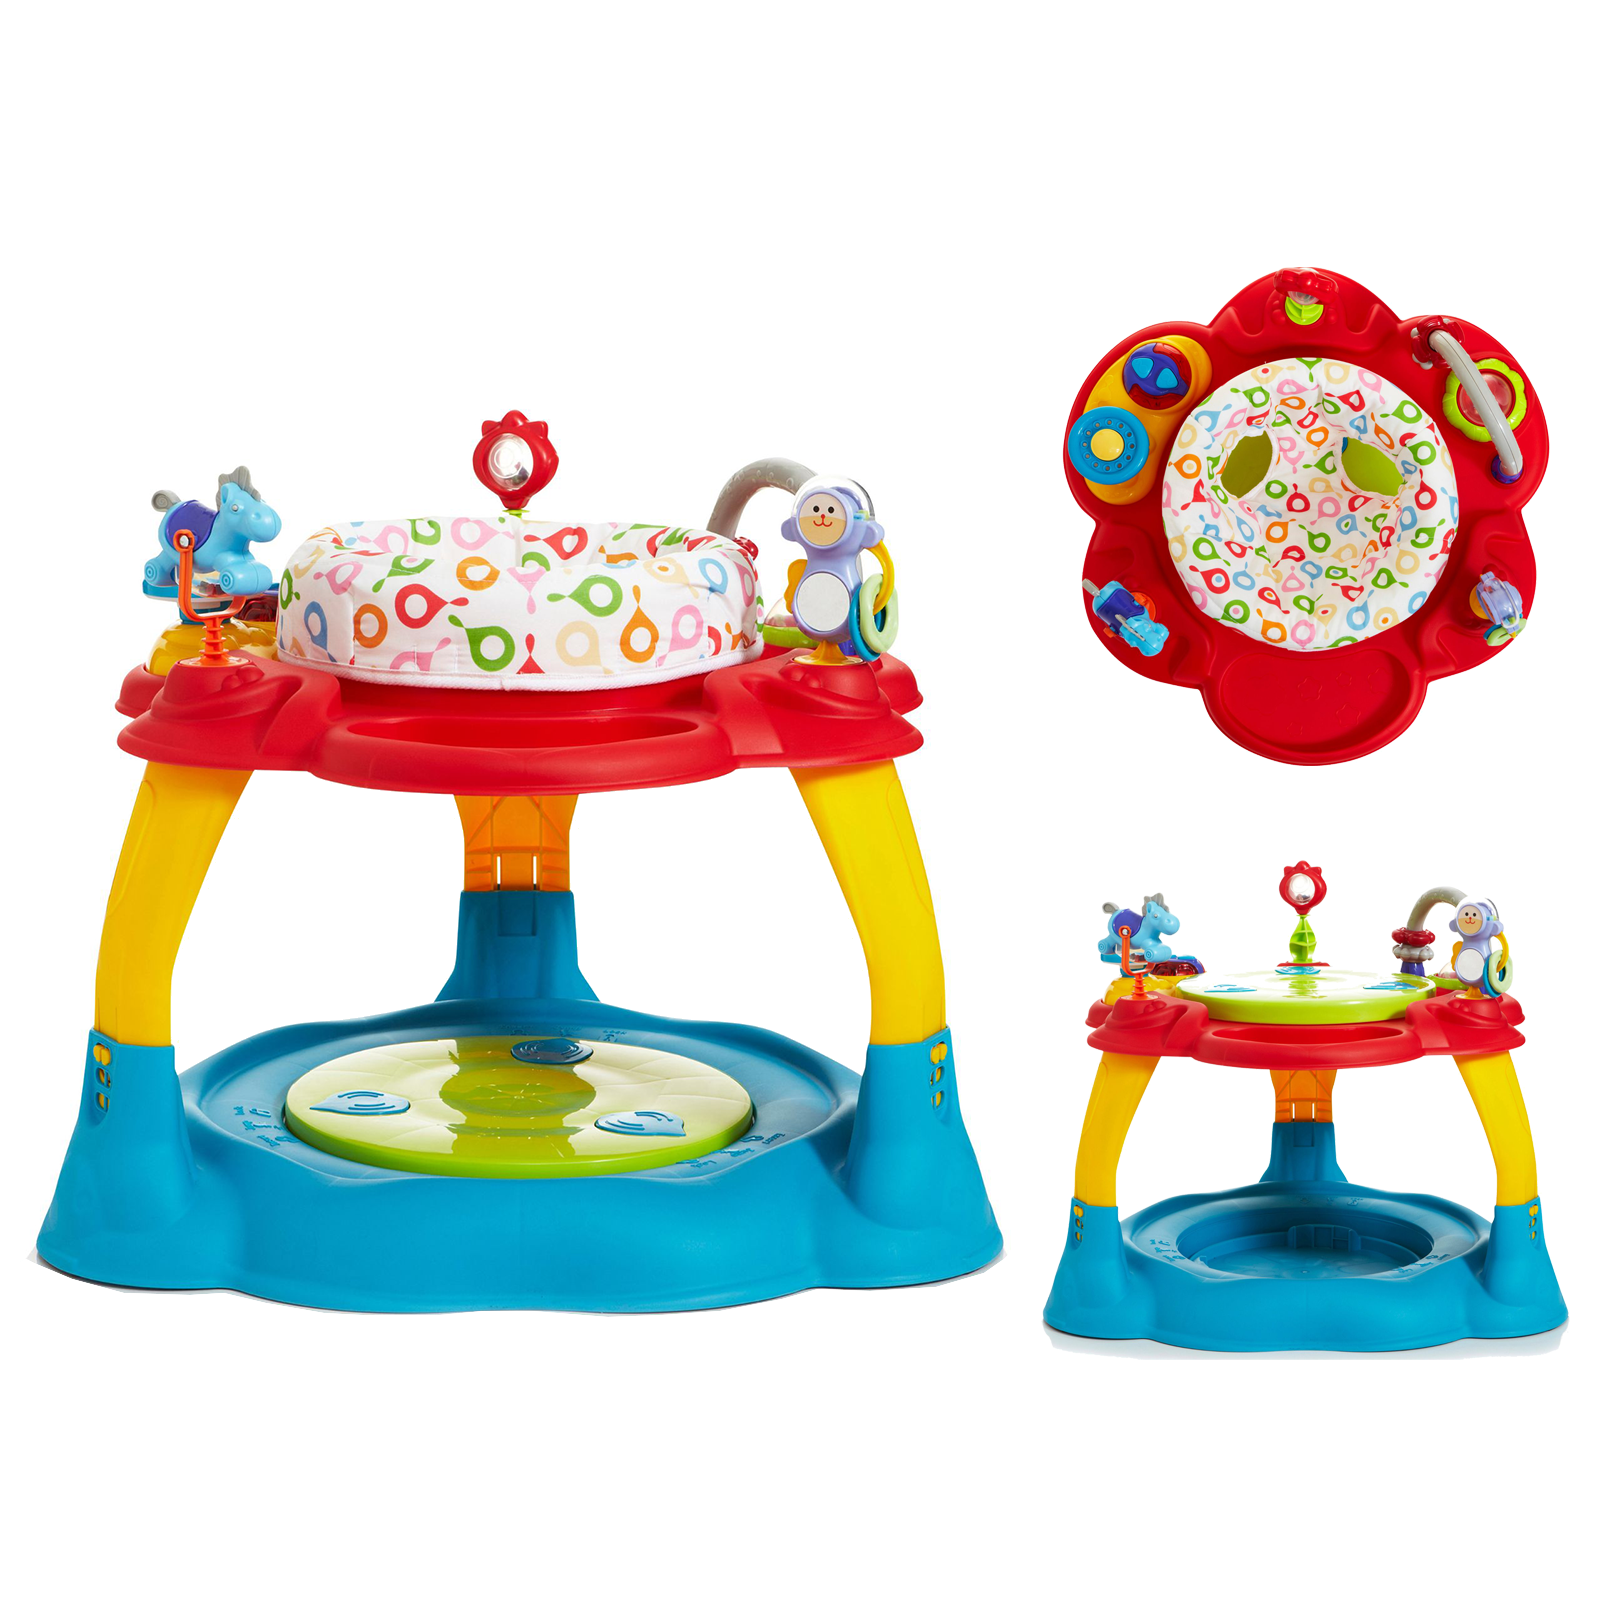 My Child 2in1 Twizzle Activity Centre - Brights